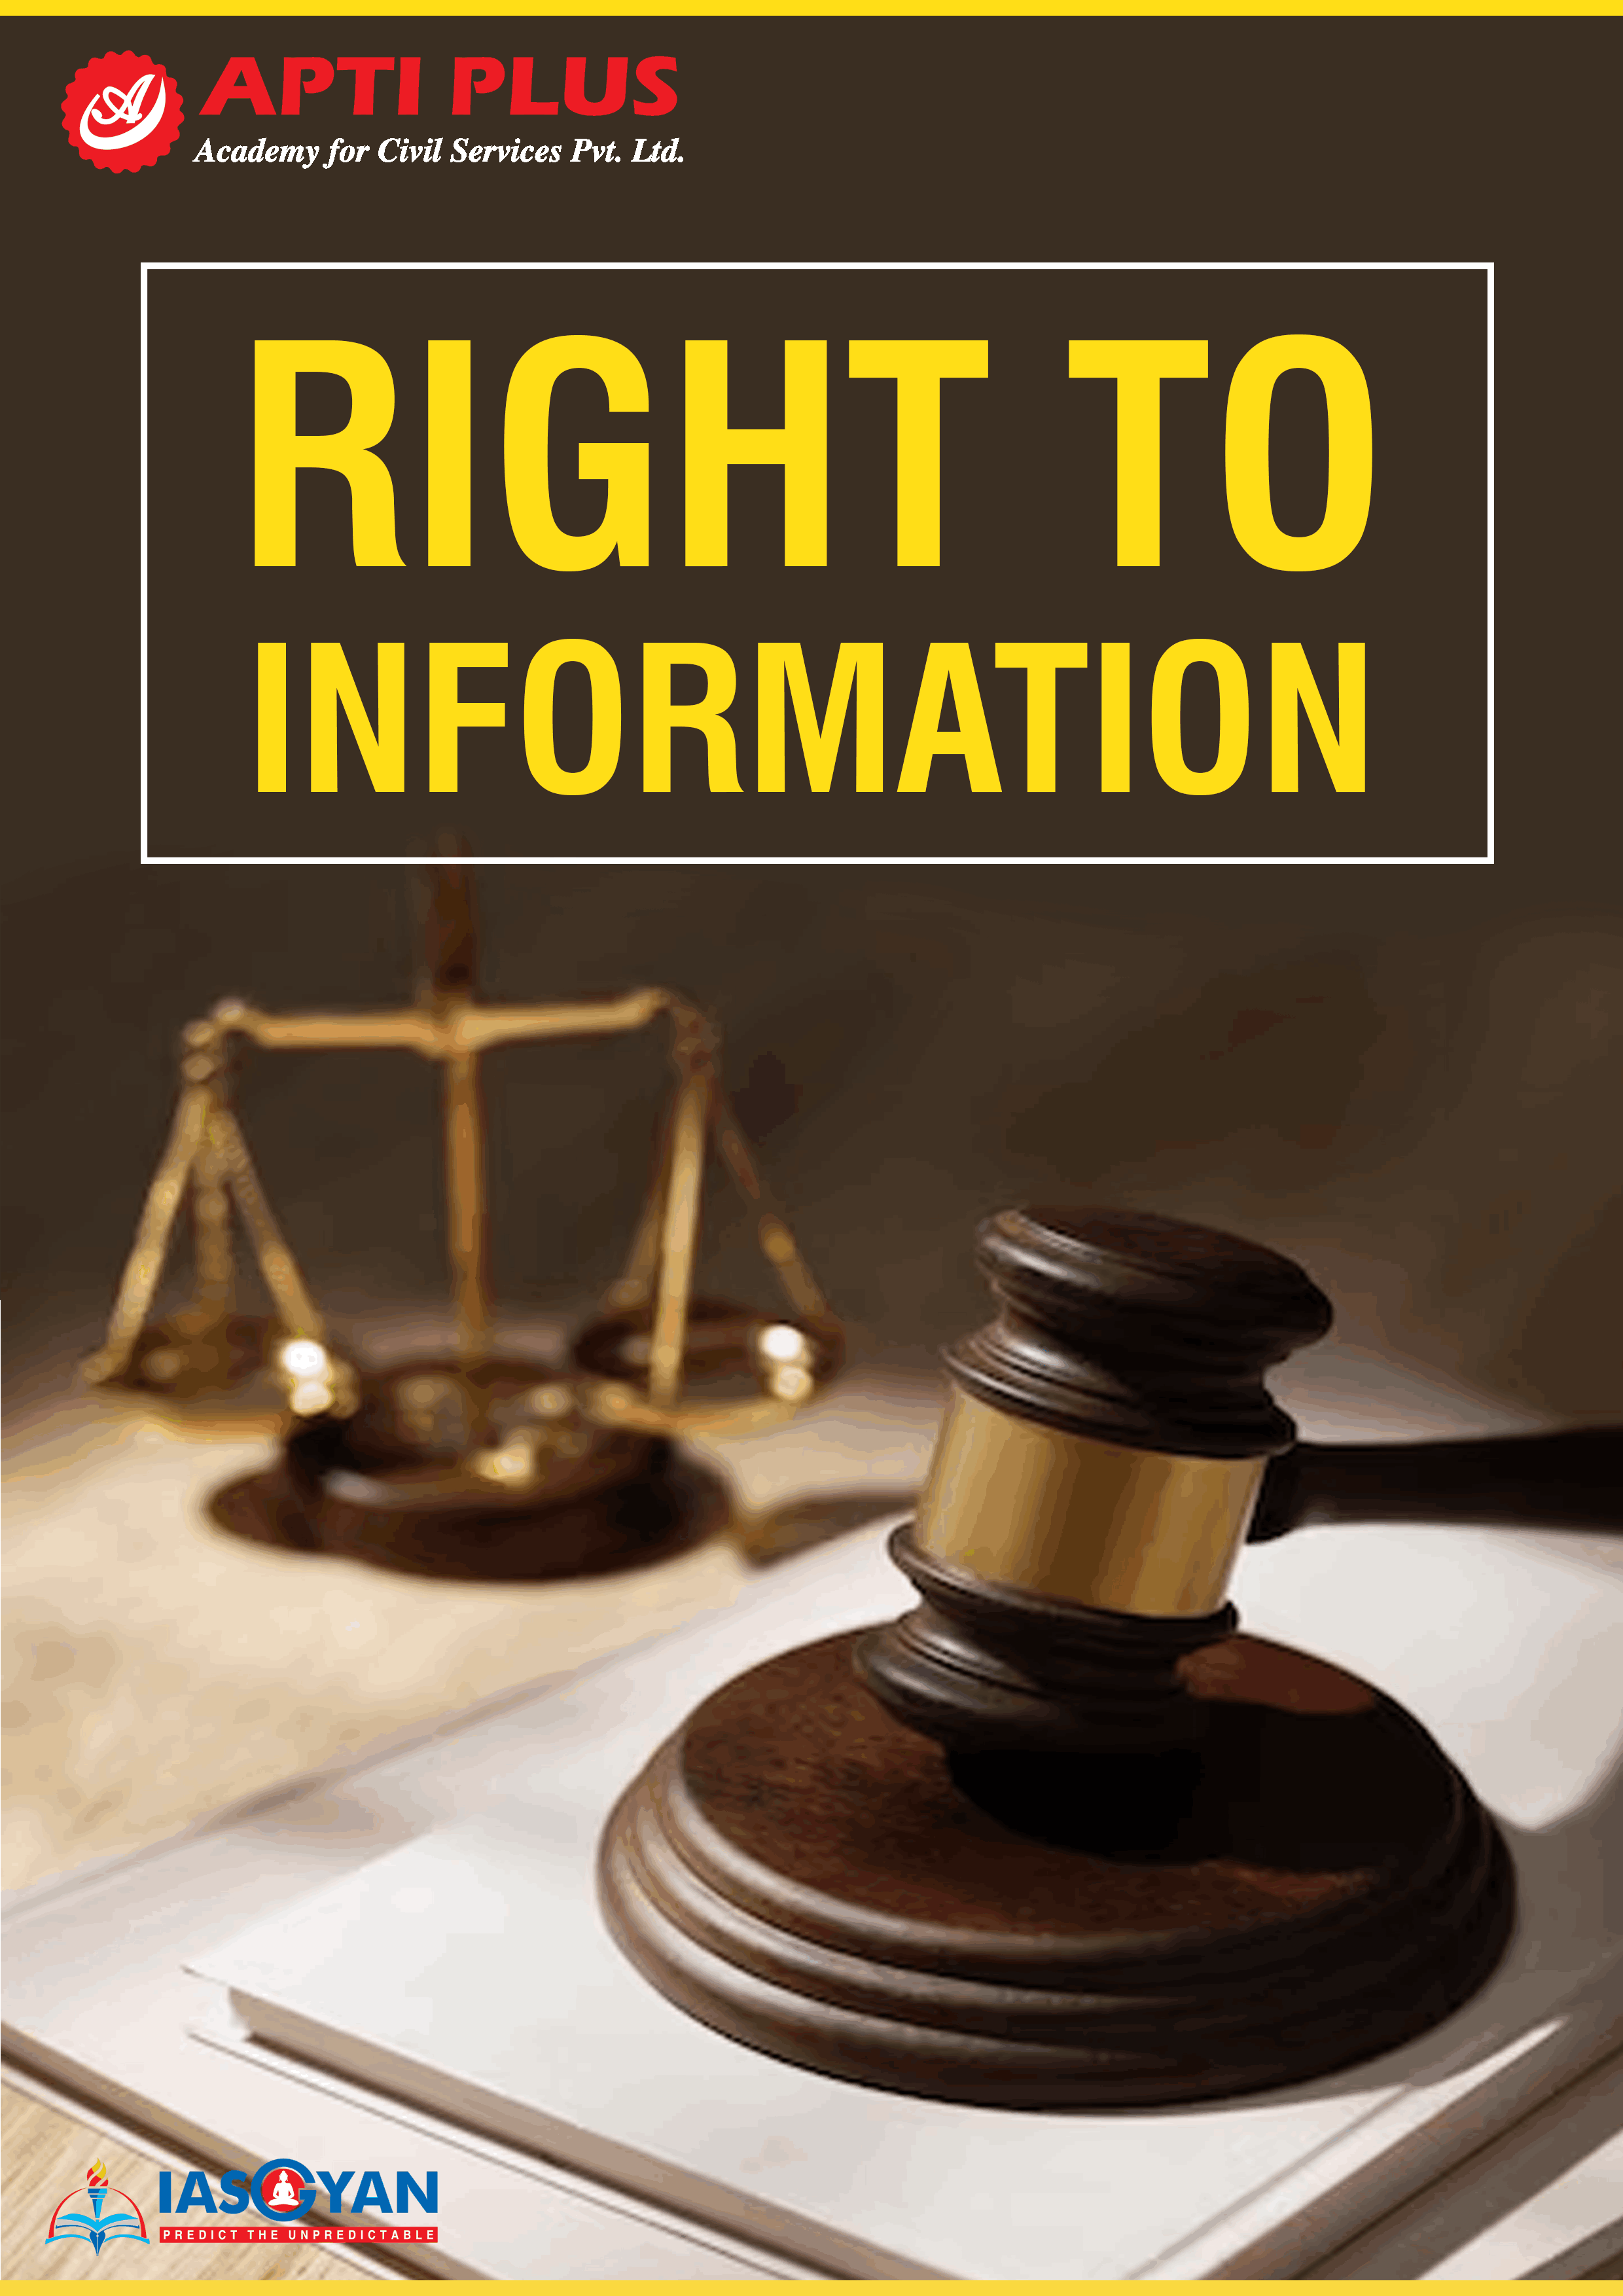 ARC Report: 1 (RIGHT TO INFORMATION)